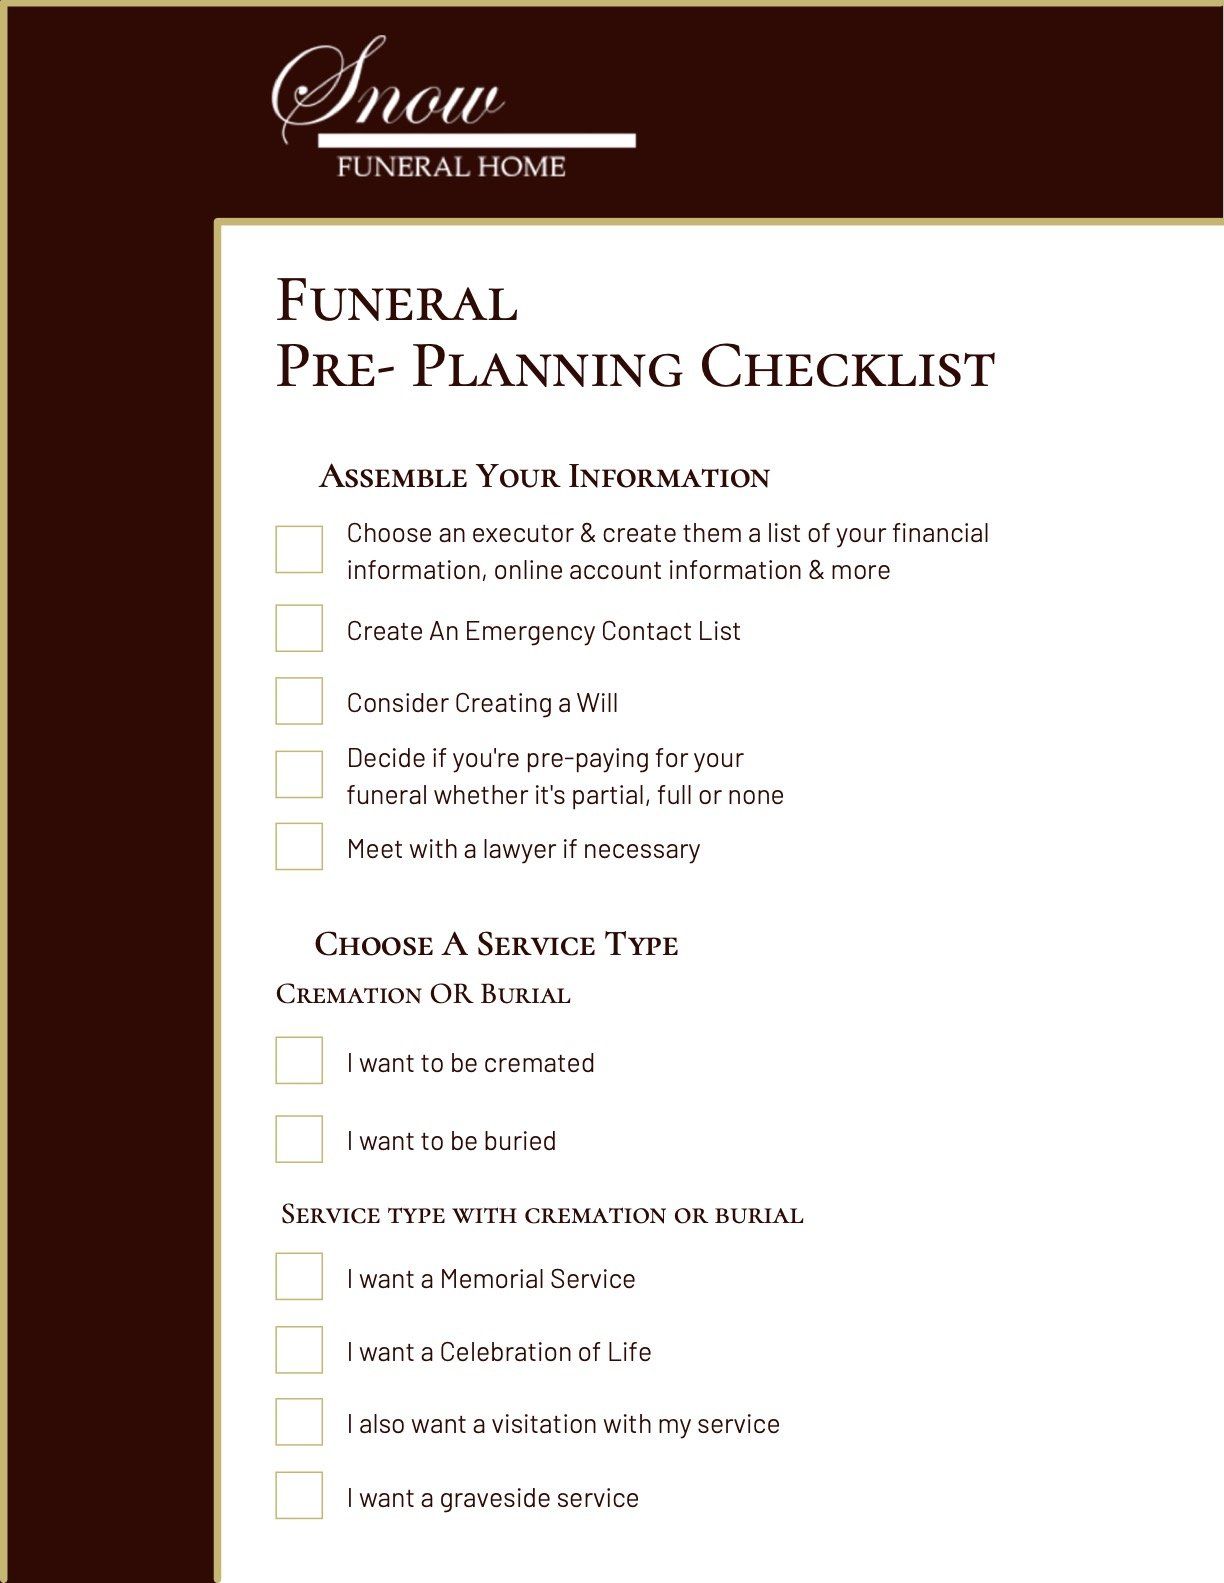 funeral-pre-planning-guide-free-pre-planning-checklist